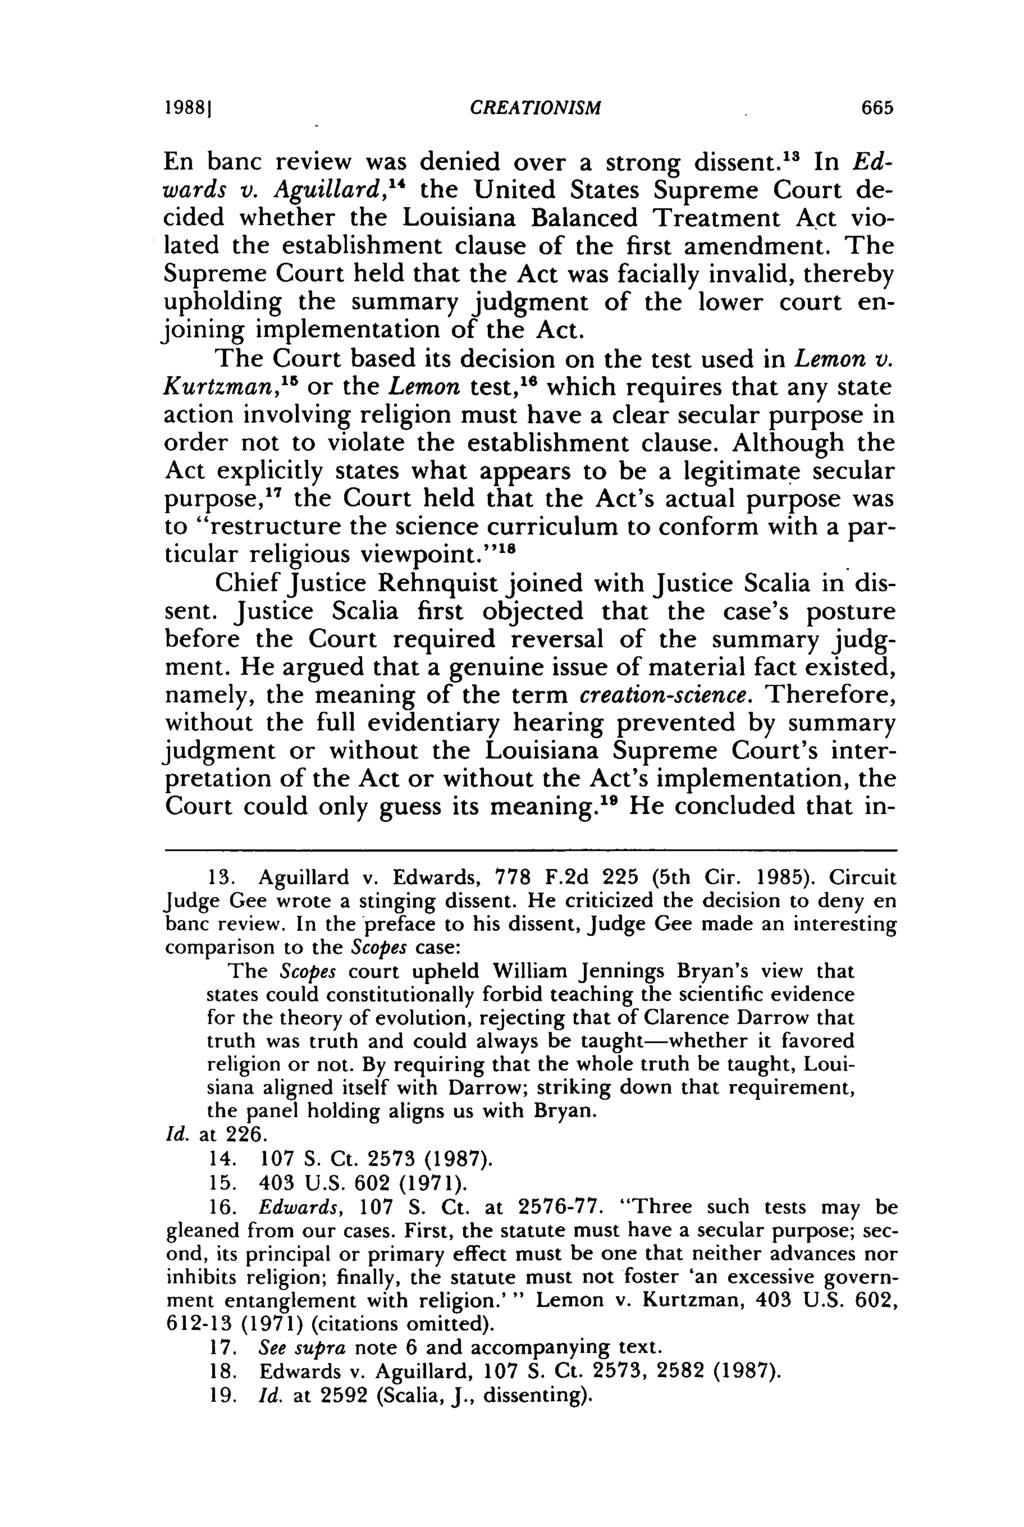 19881 CREATIONISM En banc review was denied over a strong dissent. 3 In Edwards v.